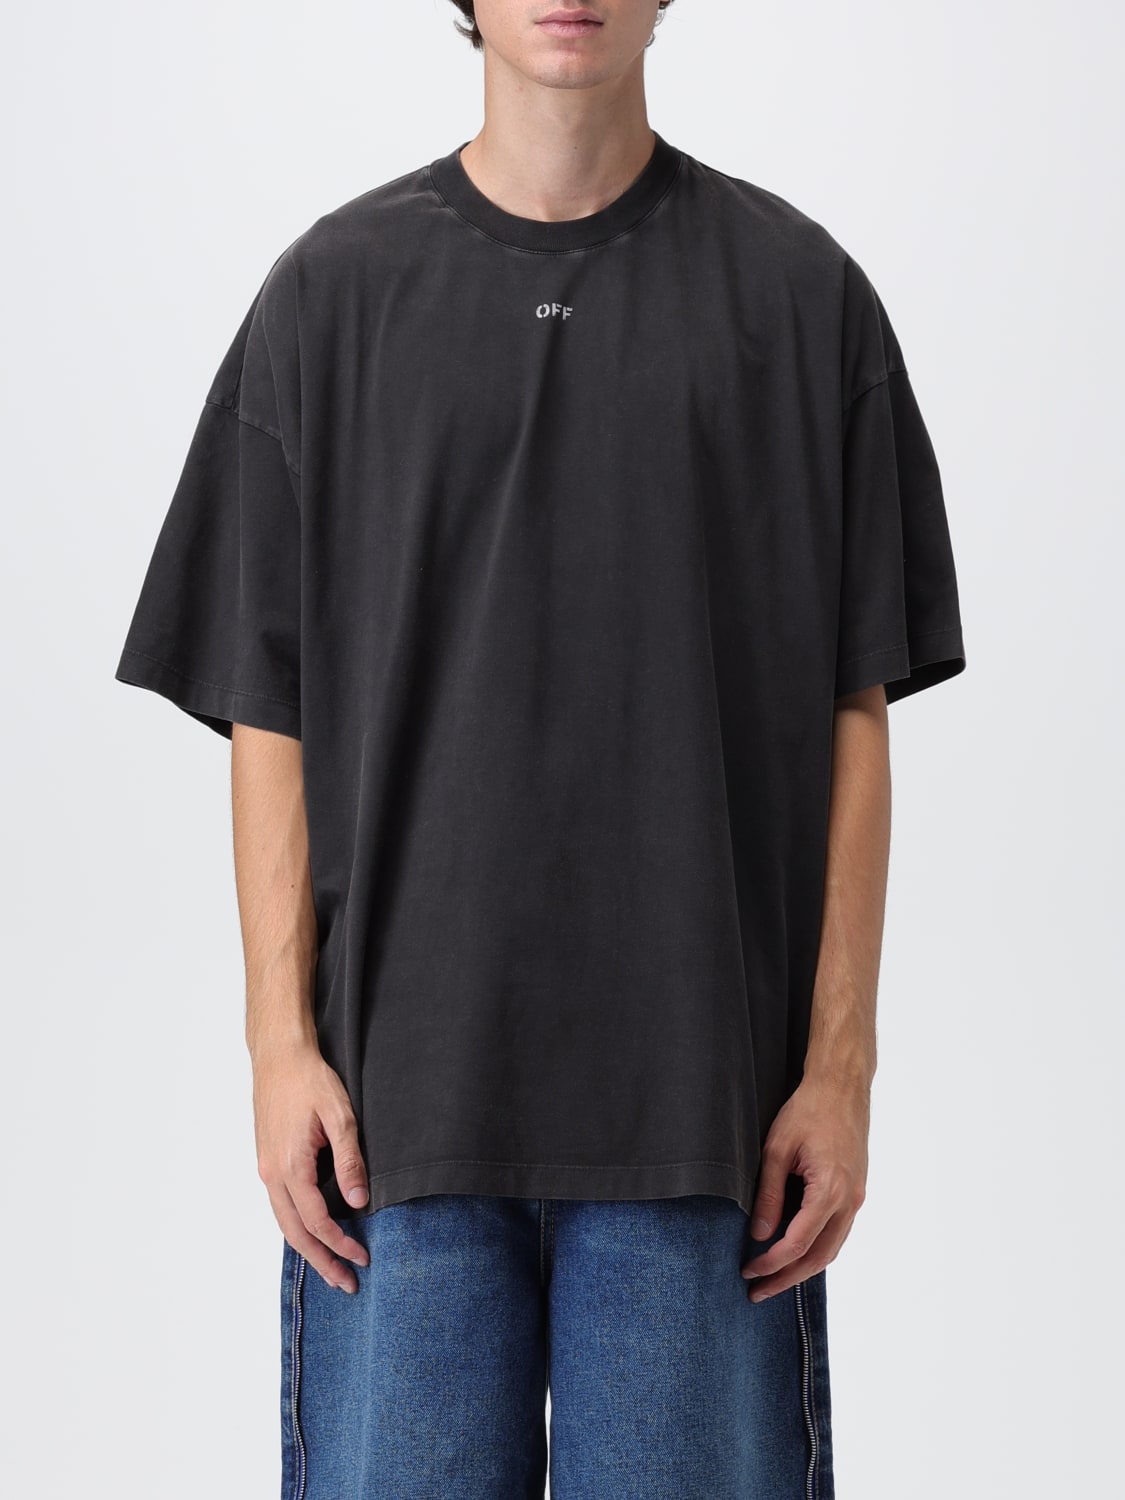 OFF-WHITE: T-shirt with mini logo - Black | Off-White t-shirt  OMAA161F23JER011 online at